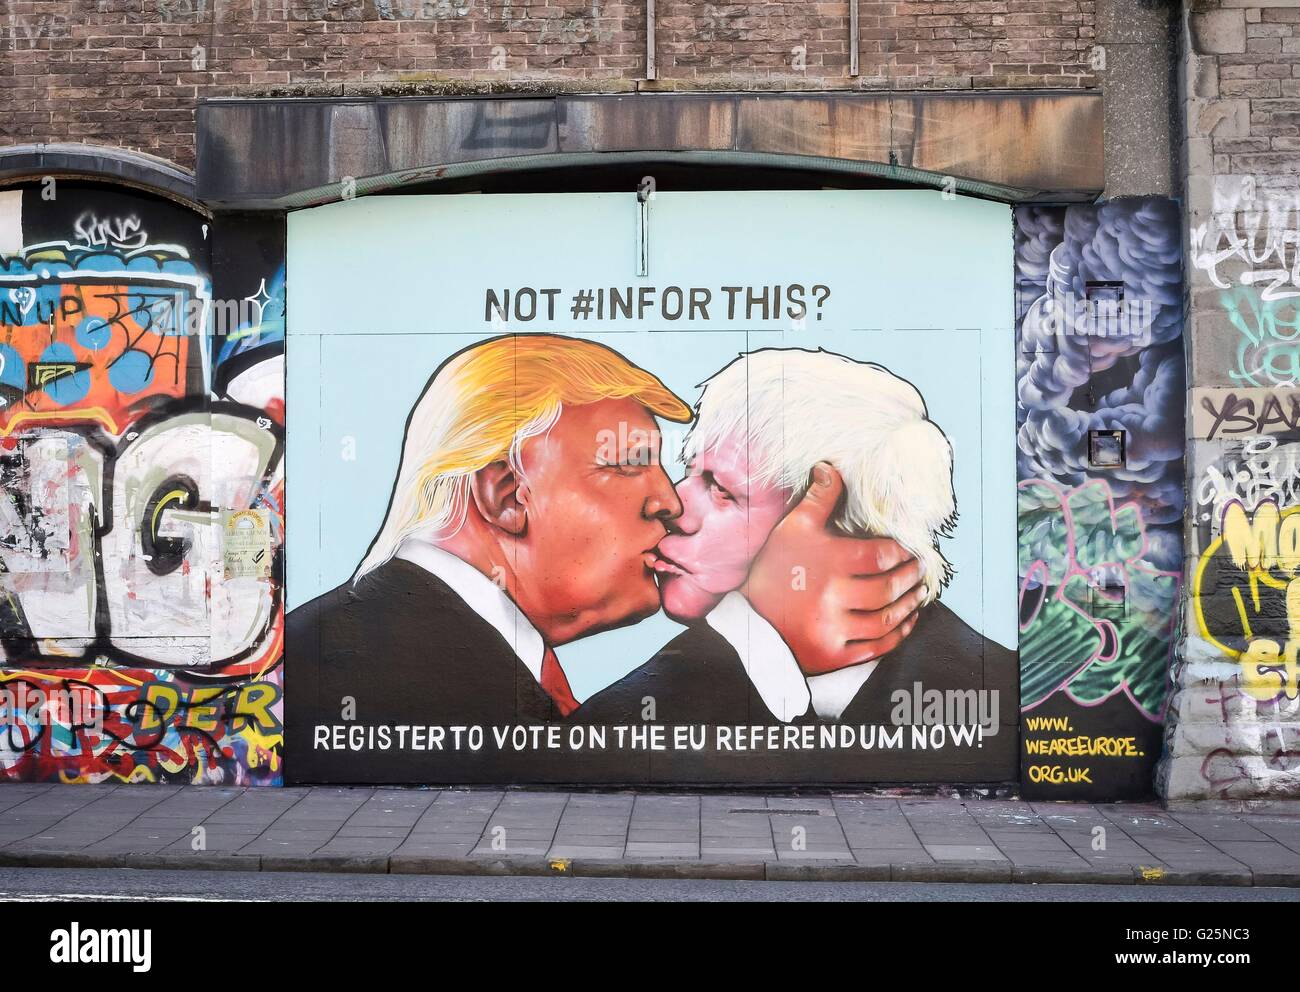 A graffiti mural of Donald Trump and Boris Johnson kissing, sprayed on a disused building in the Stokes Croft area of Bristol. Stock Photo